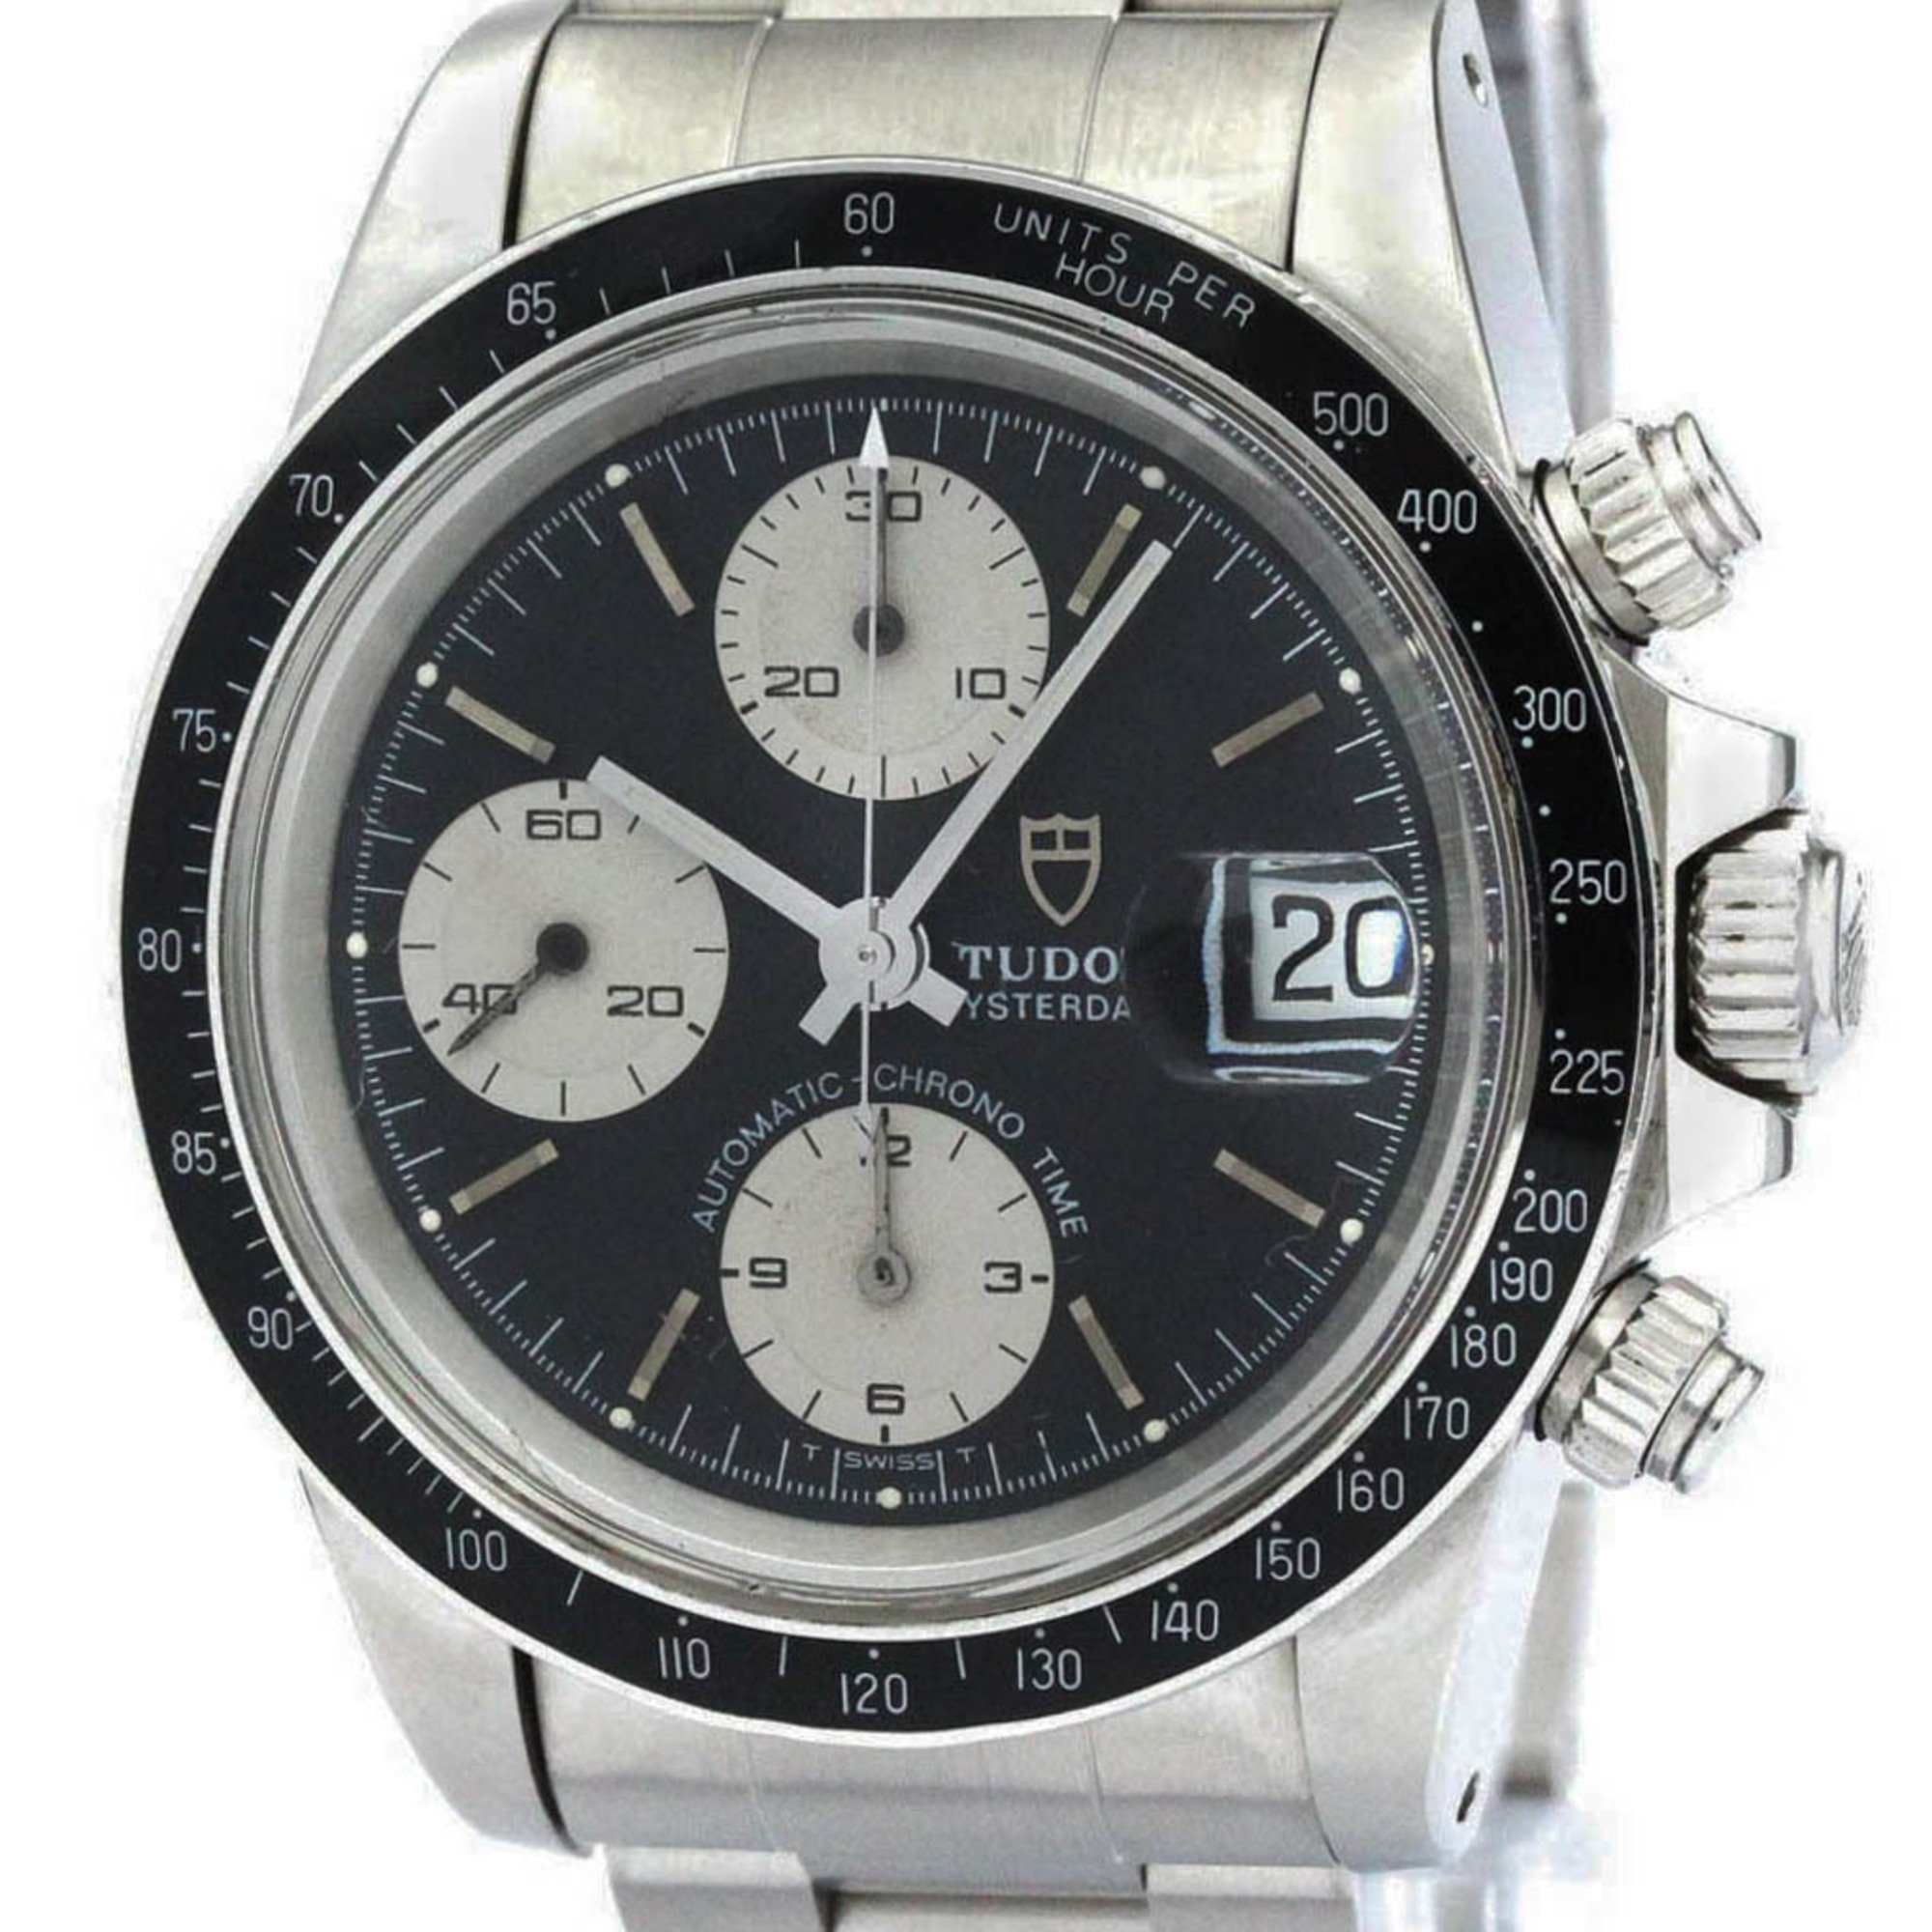 Polished TUDOR Oyster Date Chrono Time Steel Automatic Mens Watch 79160 79160